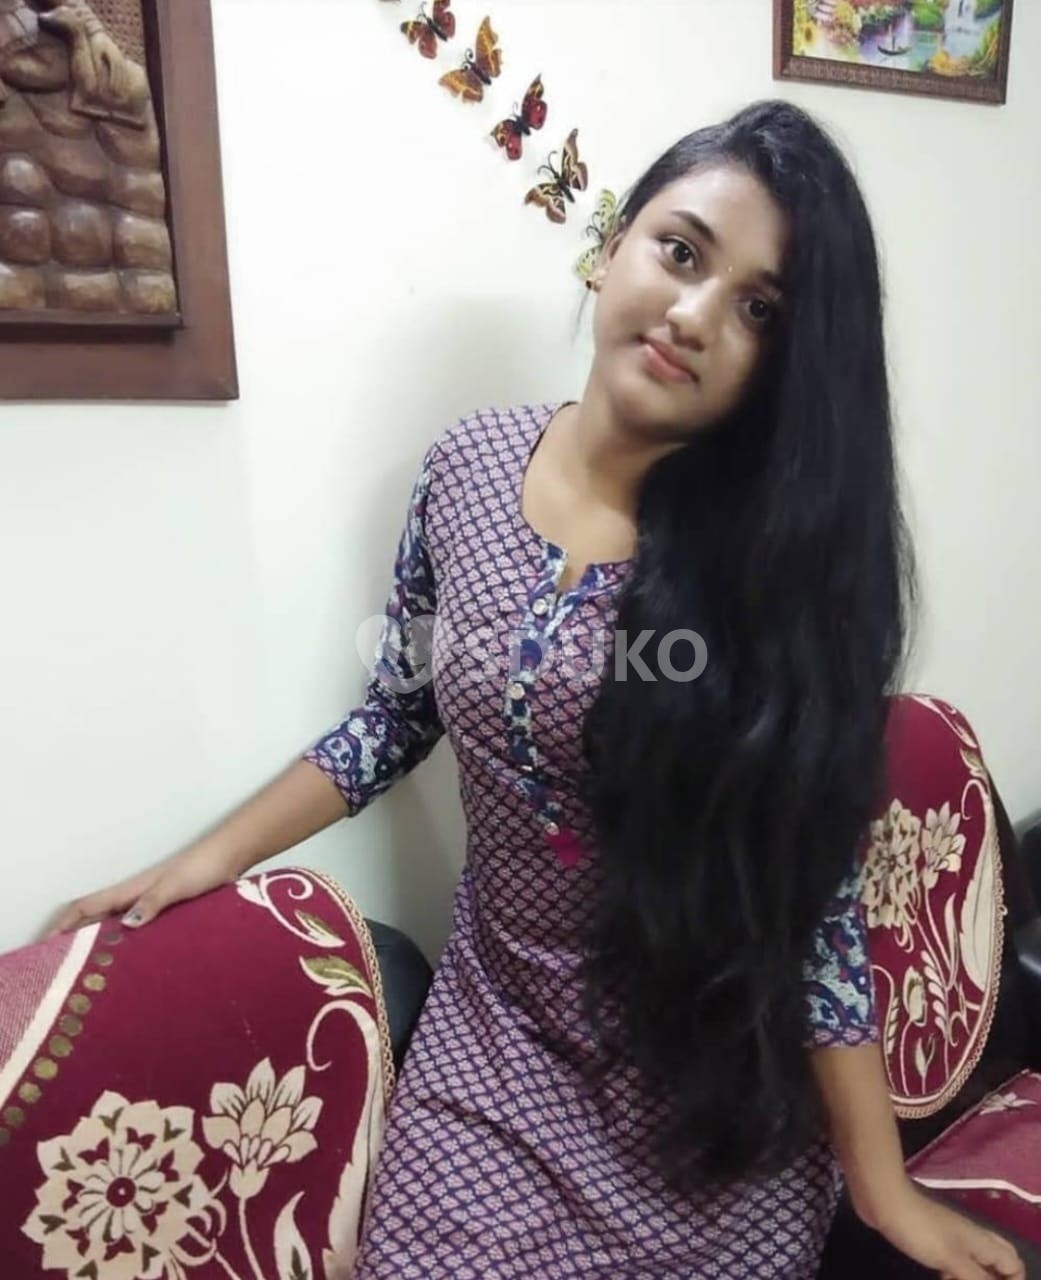 Varkala "" MY SELF DIVYA UNLIMITED SEX CUTE BEST SERVICE AND SAFE AND SECURE AND 24 HR AVAILABLE